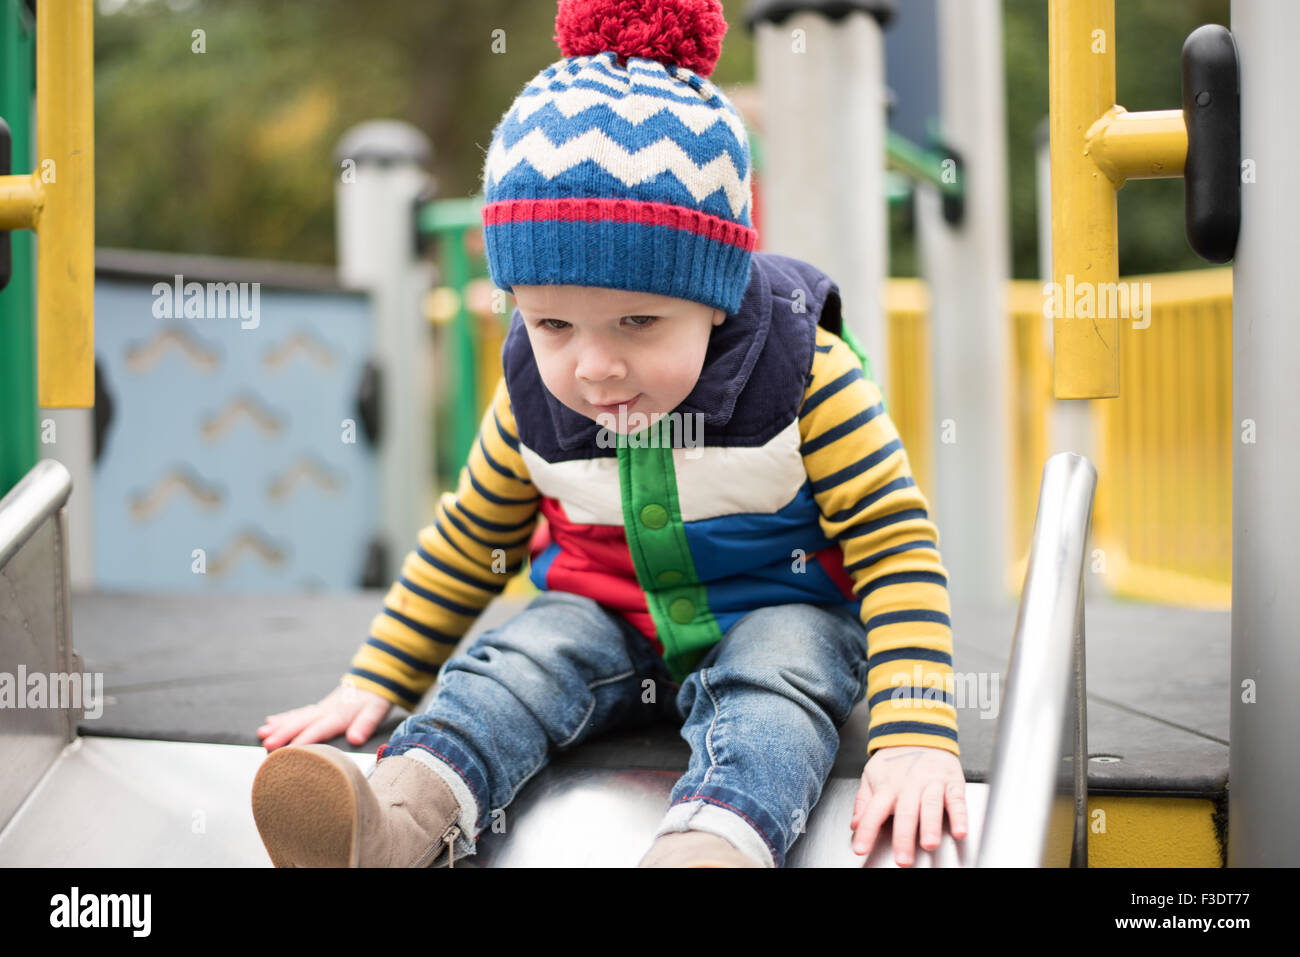 Young Boy playing in park on slide Stock Photo